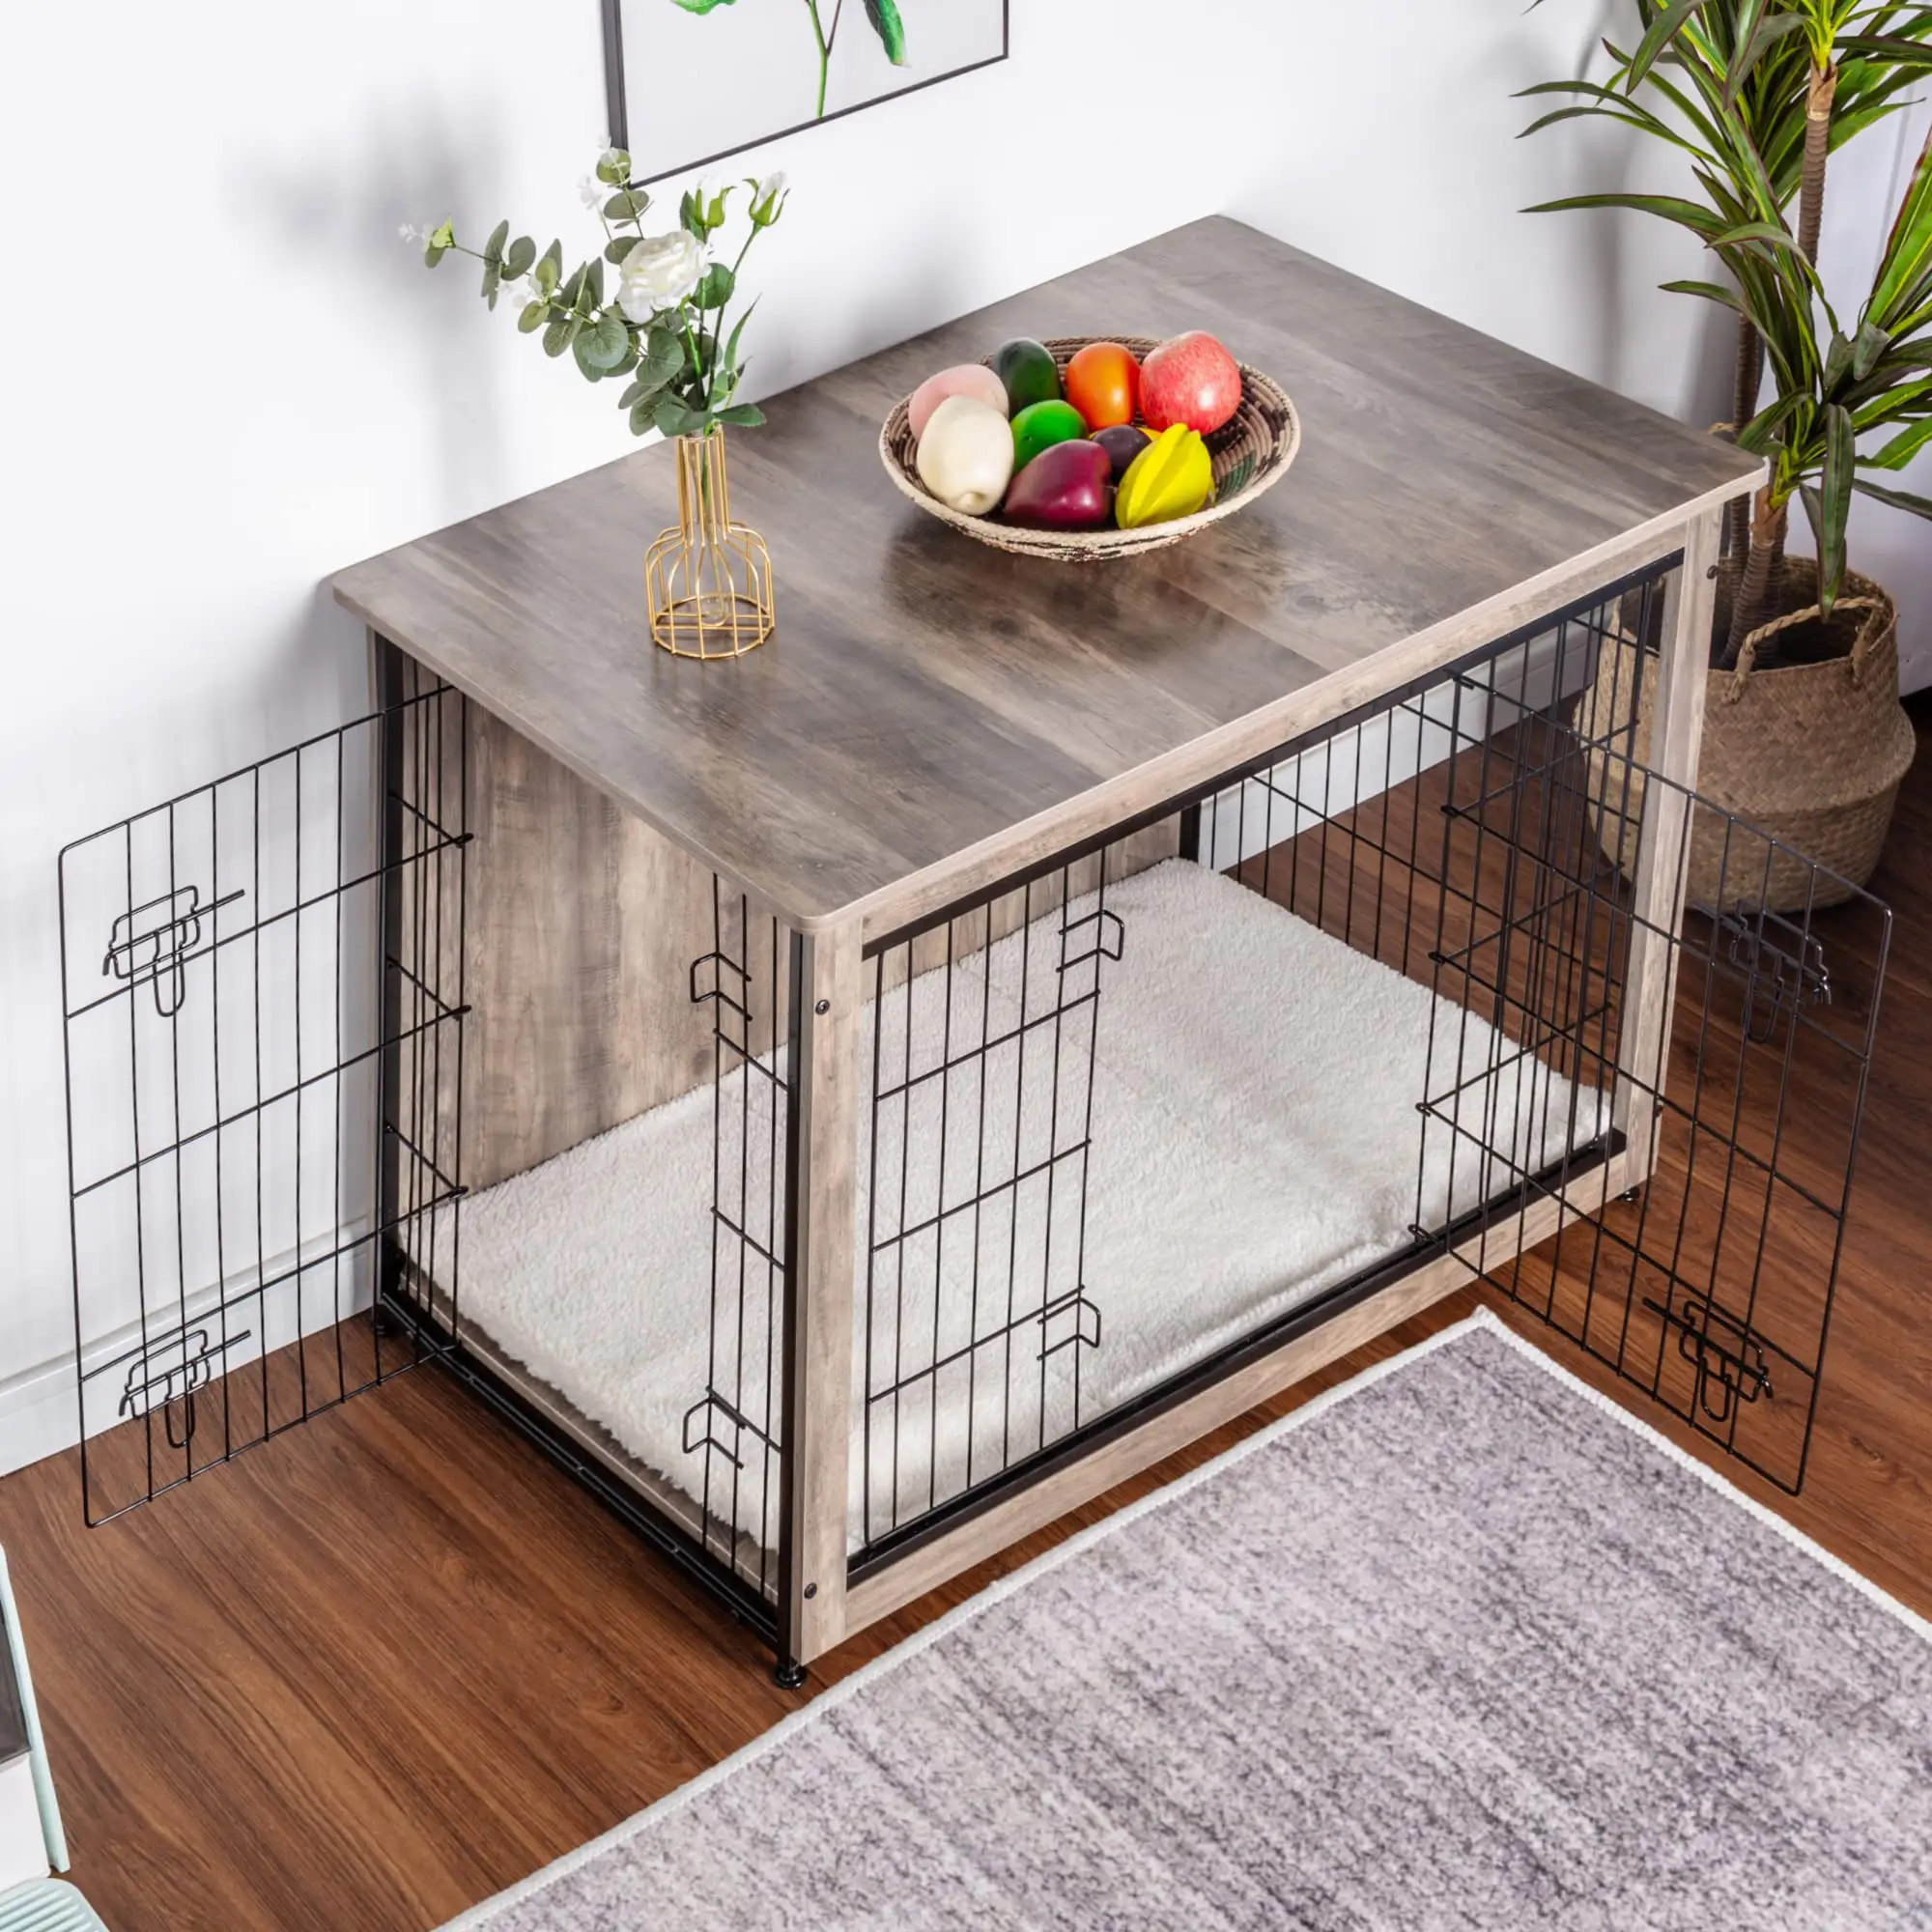 Hot Selling Luxury Portable Small Pet House Crate Solid Wood Mobile Dog Cage Indoor and Outdoor Kennel with Animal Pattern